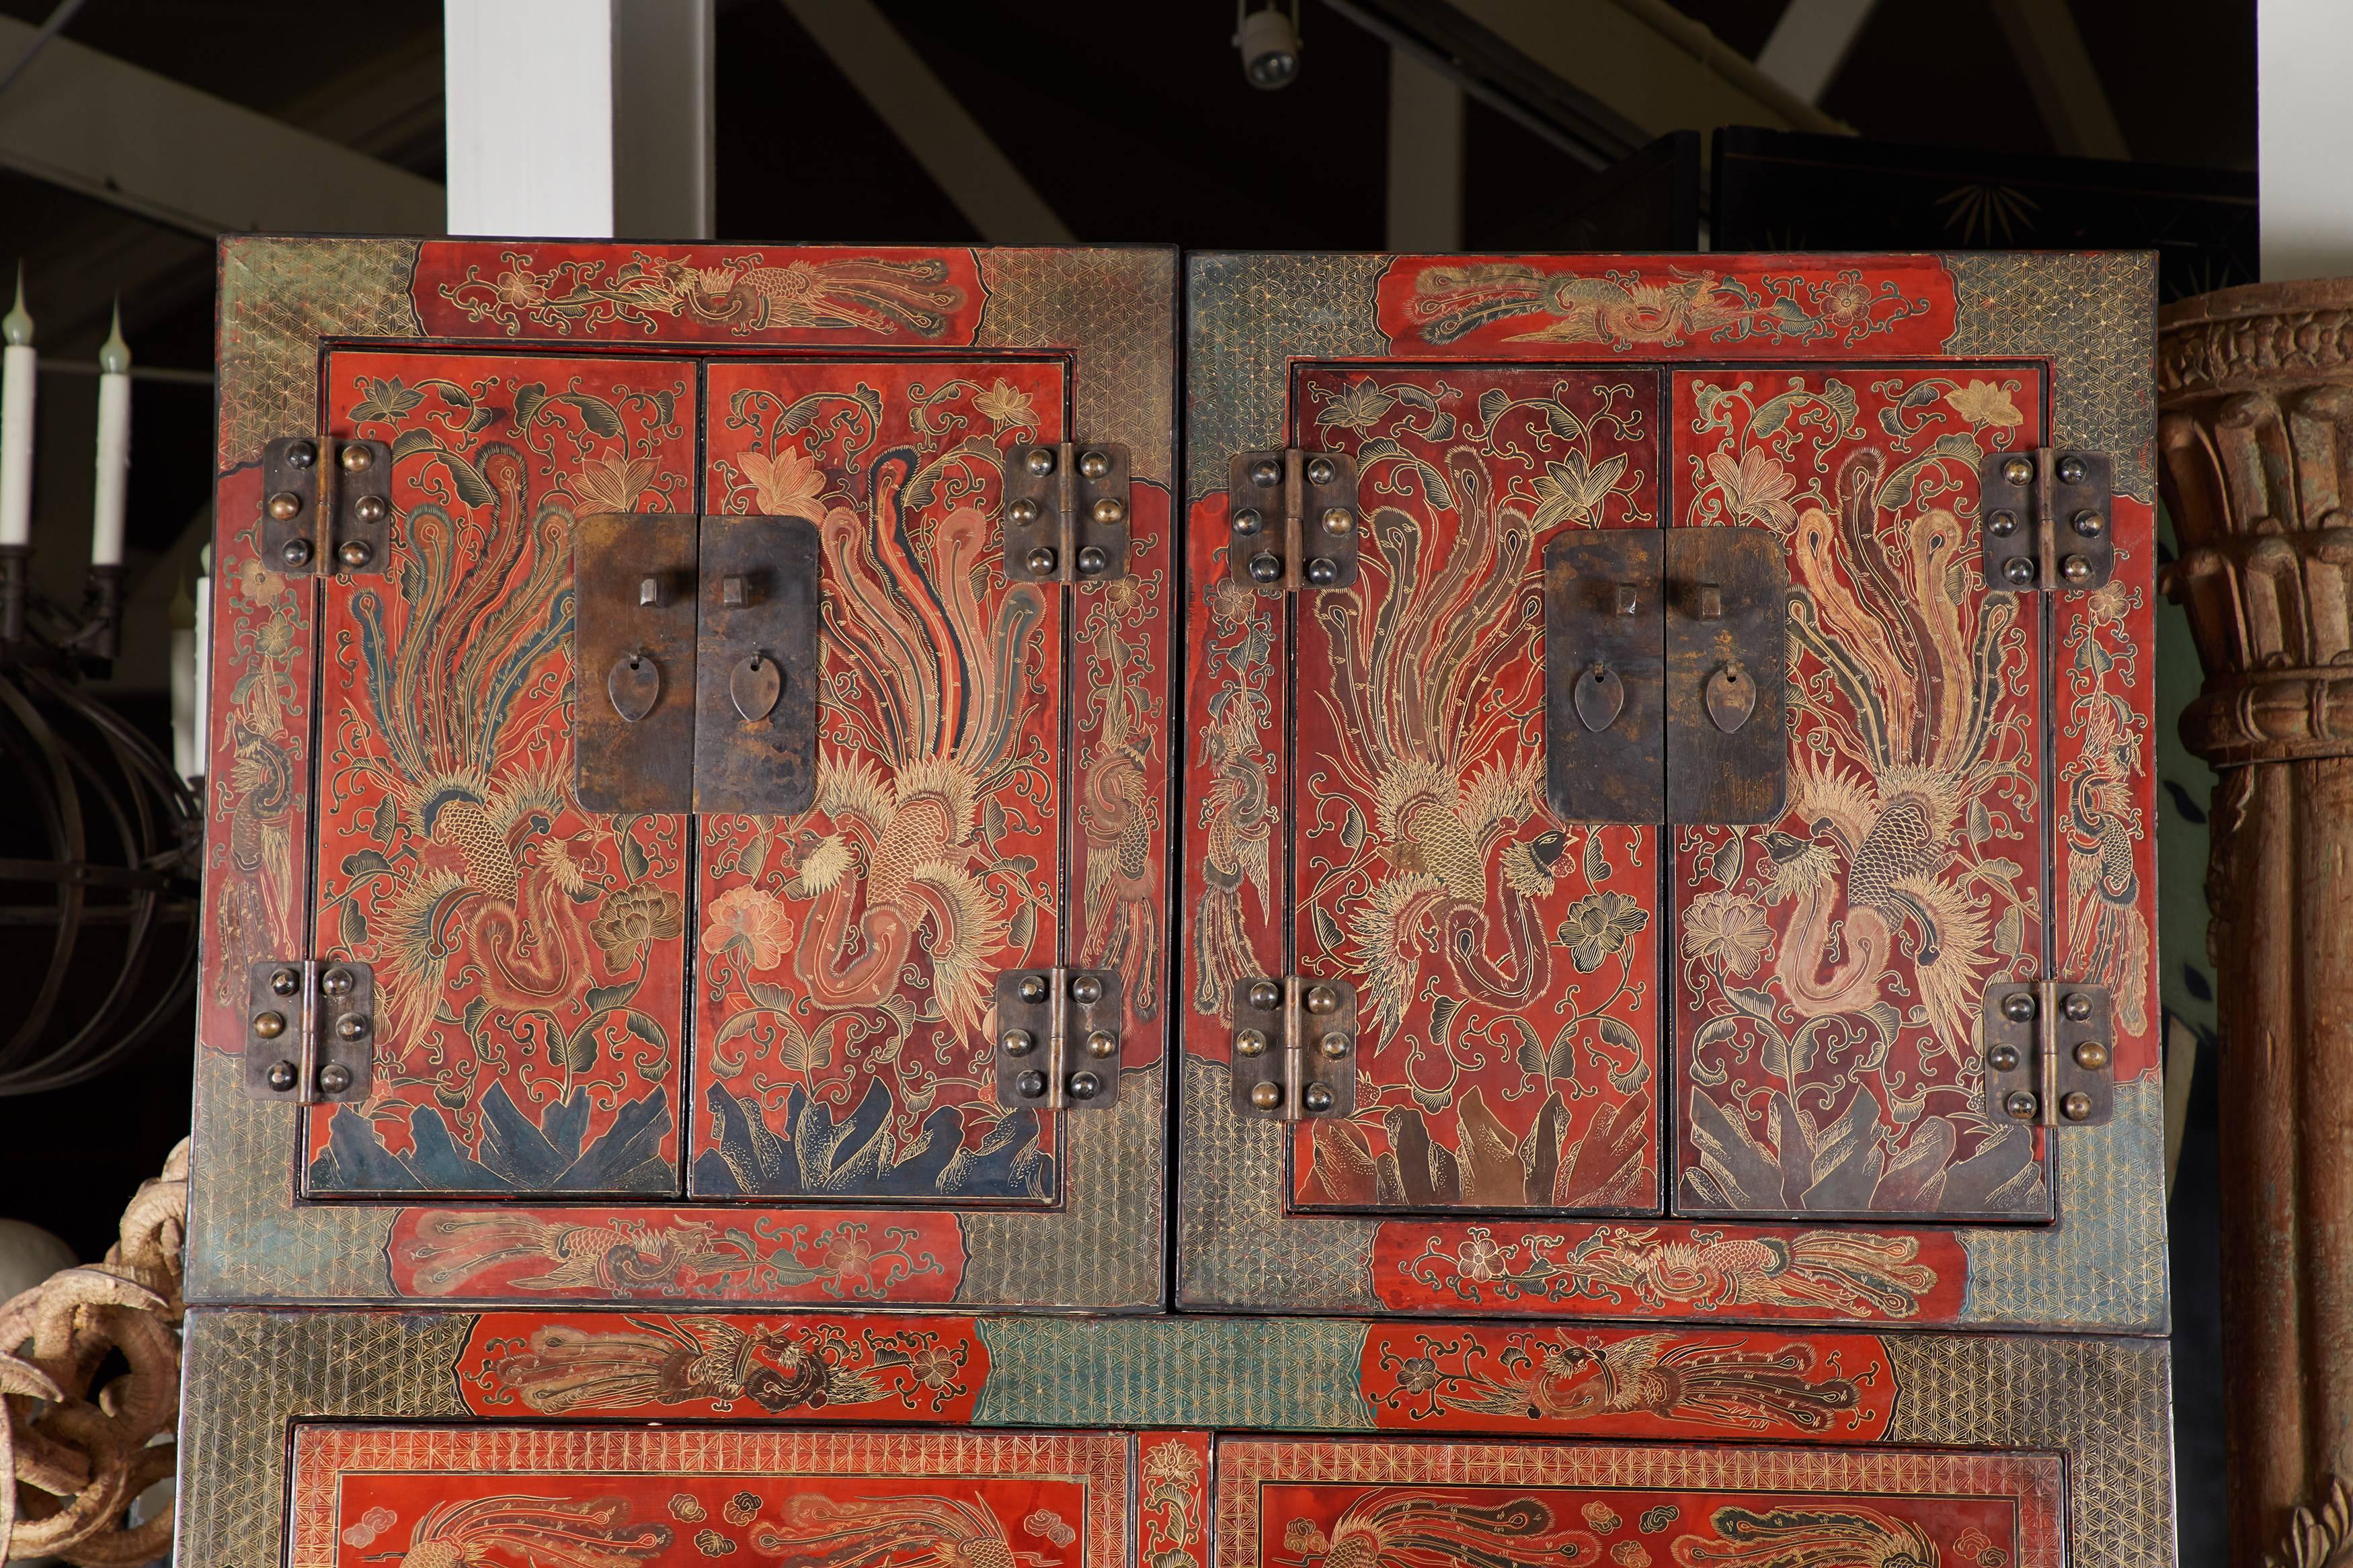 Pair of 20th century Chinese Coromandel cabinets. Measure: Hat cabinets are each 27 1/2” H x 24 1/2” W x 21” D.